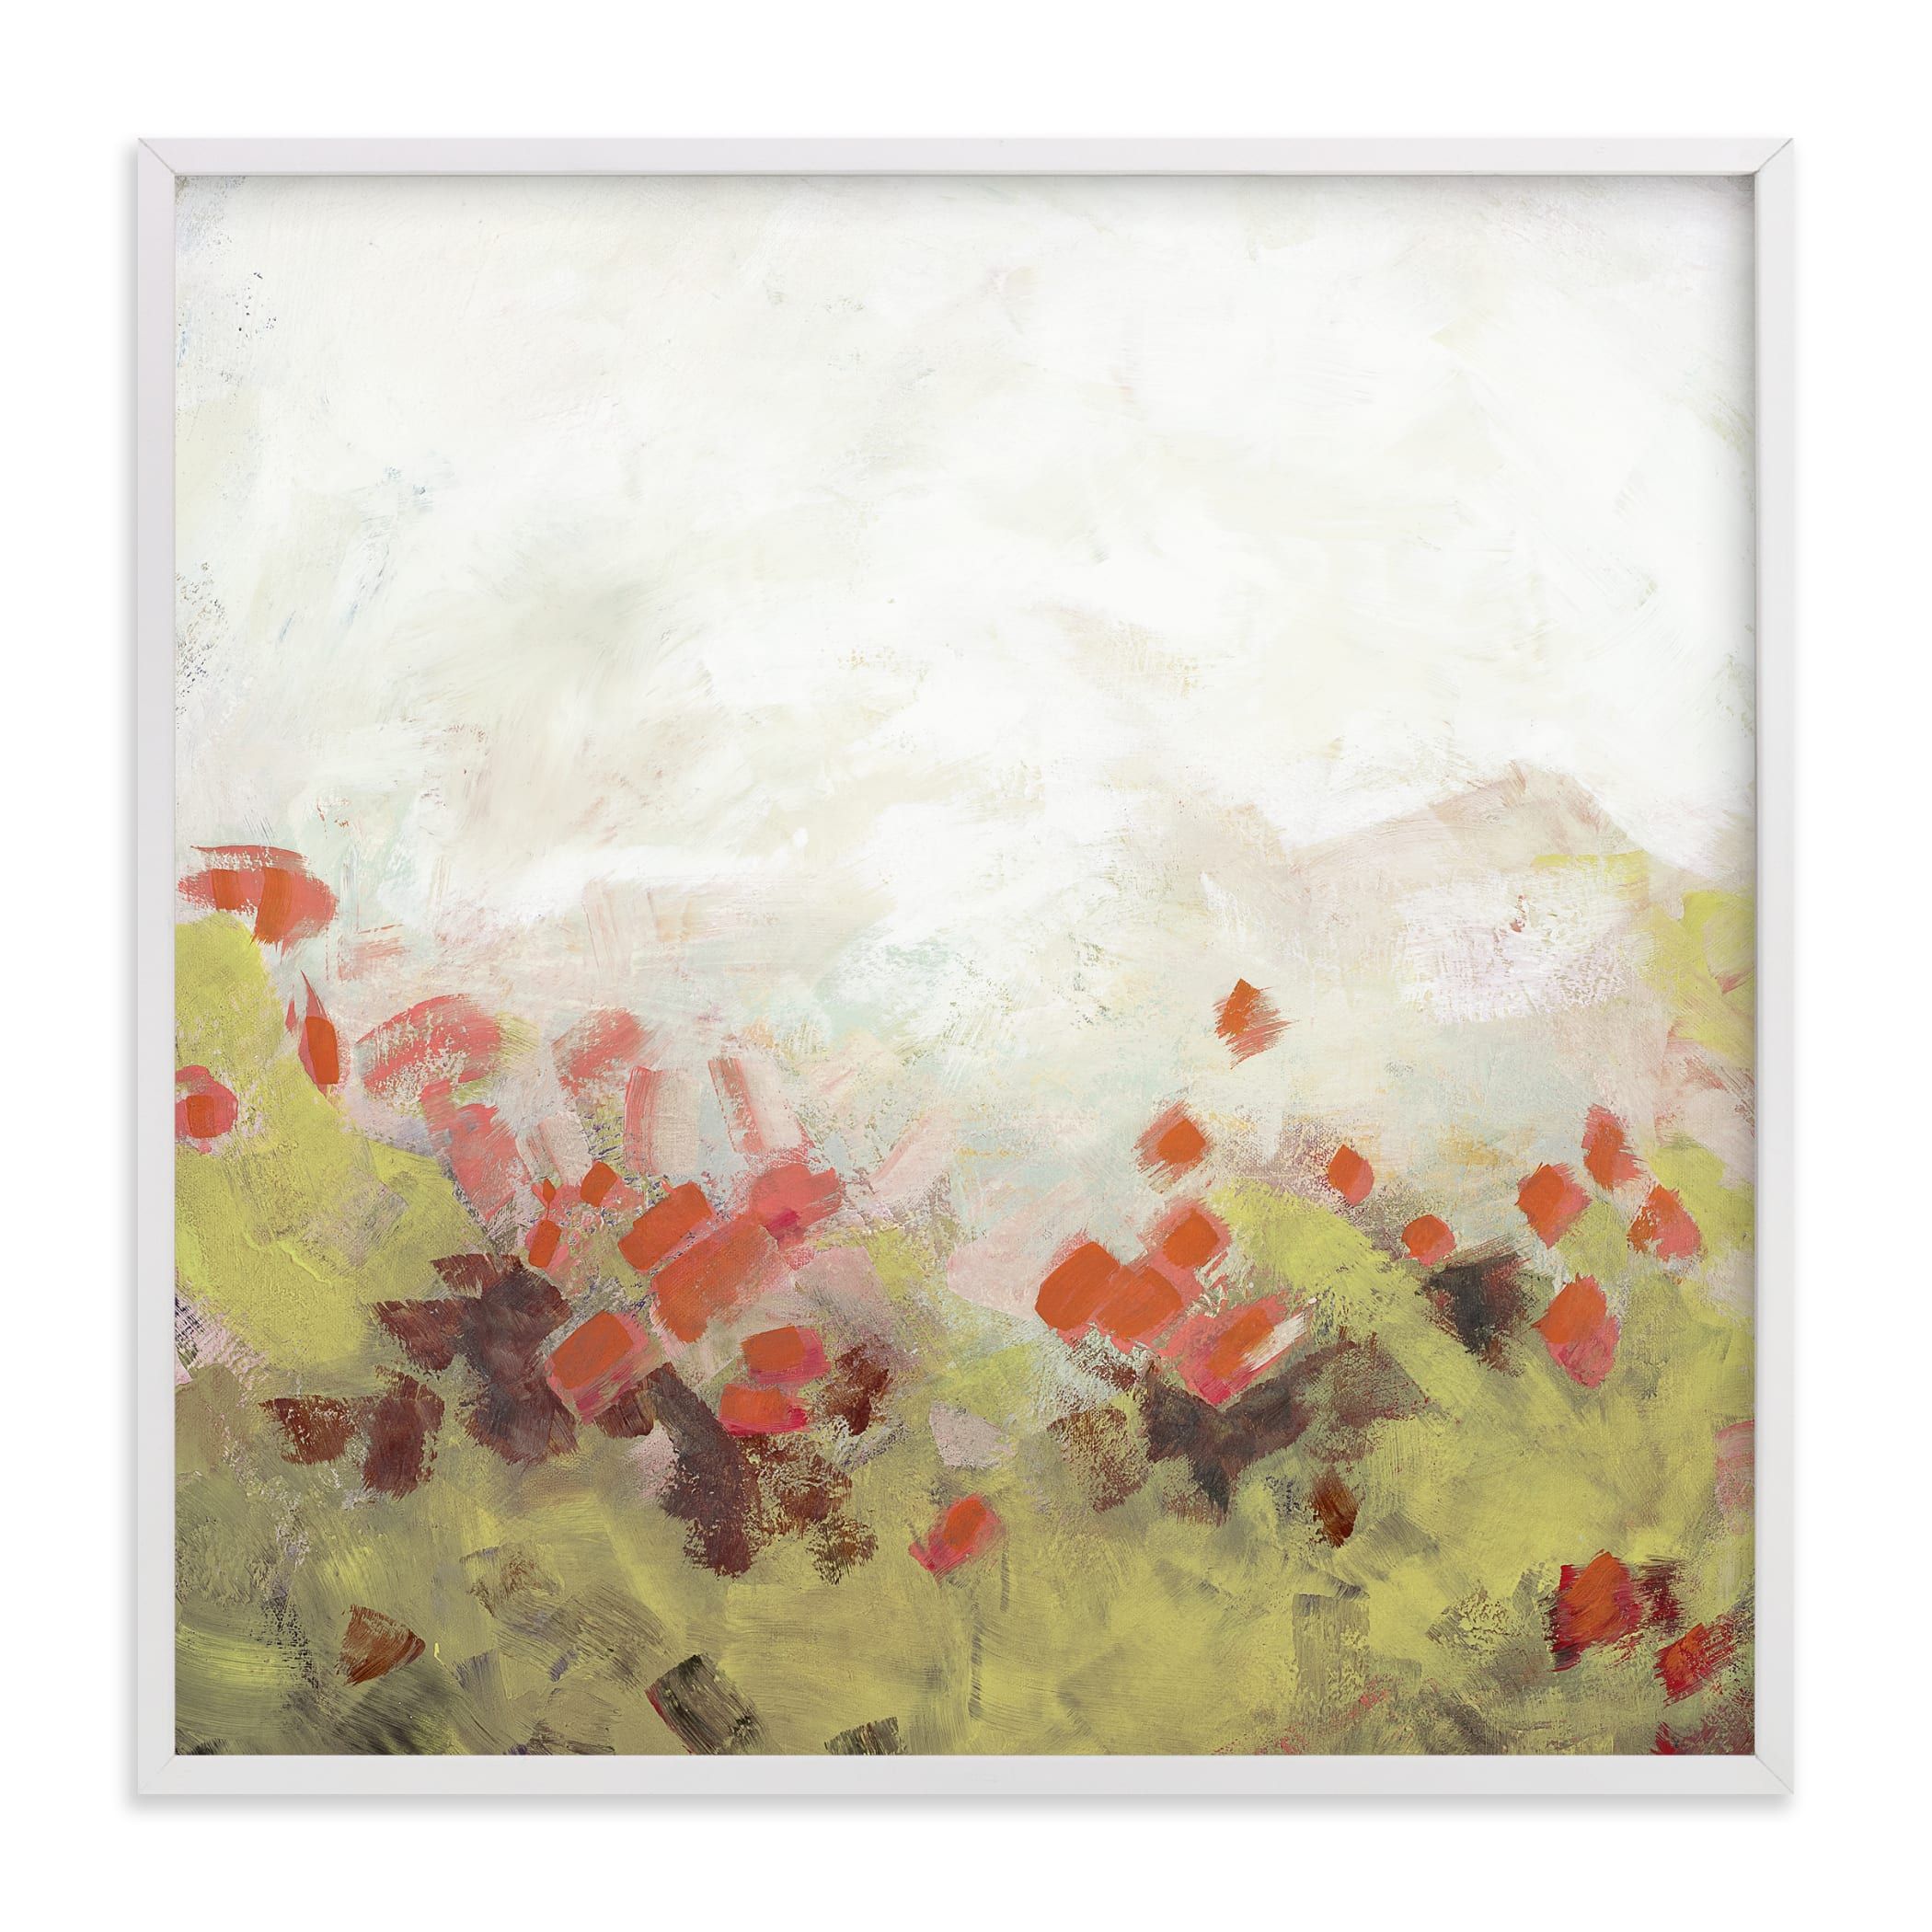 "Cosmos Garden" - Painting Limited Edition Art Print by Lorent and Leif. | Minted